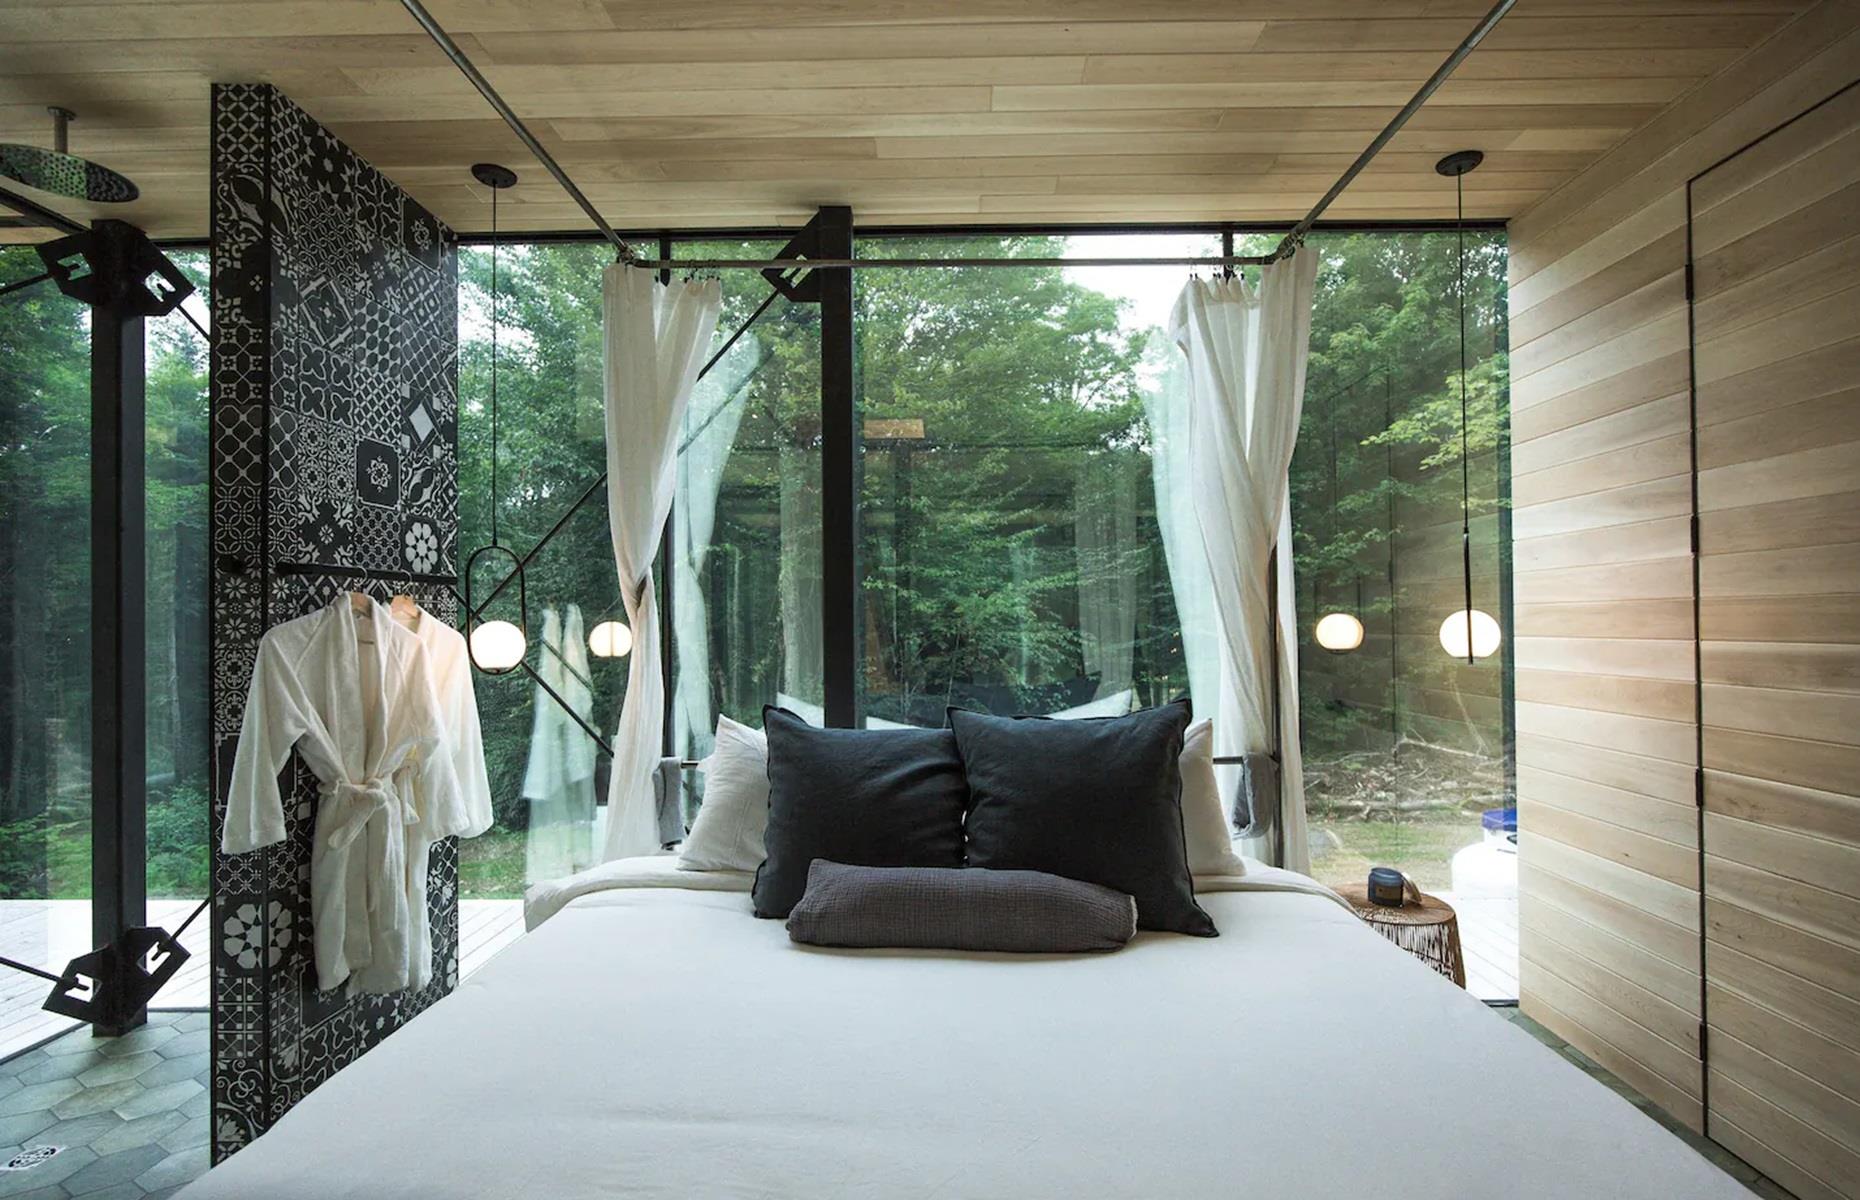 <p>With an open layout, the master bathroom has all-glass walls that allow for dreamy woodland views, while fluffy robes add to the romance. There's also a sunken bathtub, positioned next to the window, so you can become one with nature while you soak.</p>  <p>What's more, the stilted chalet is bike in/bike out and is only a few minutes' drive from the region's ski slopes, making it the ultimate getaway spot for all seasons.</p>